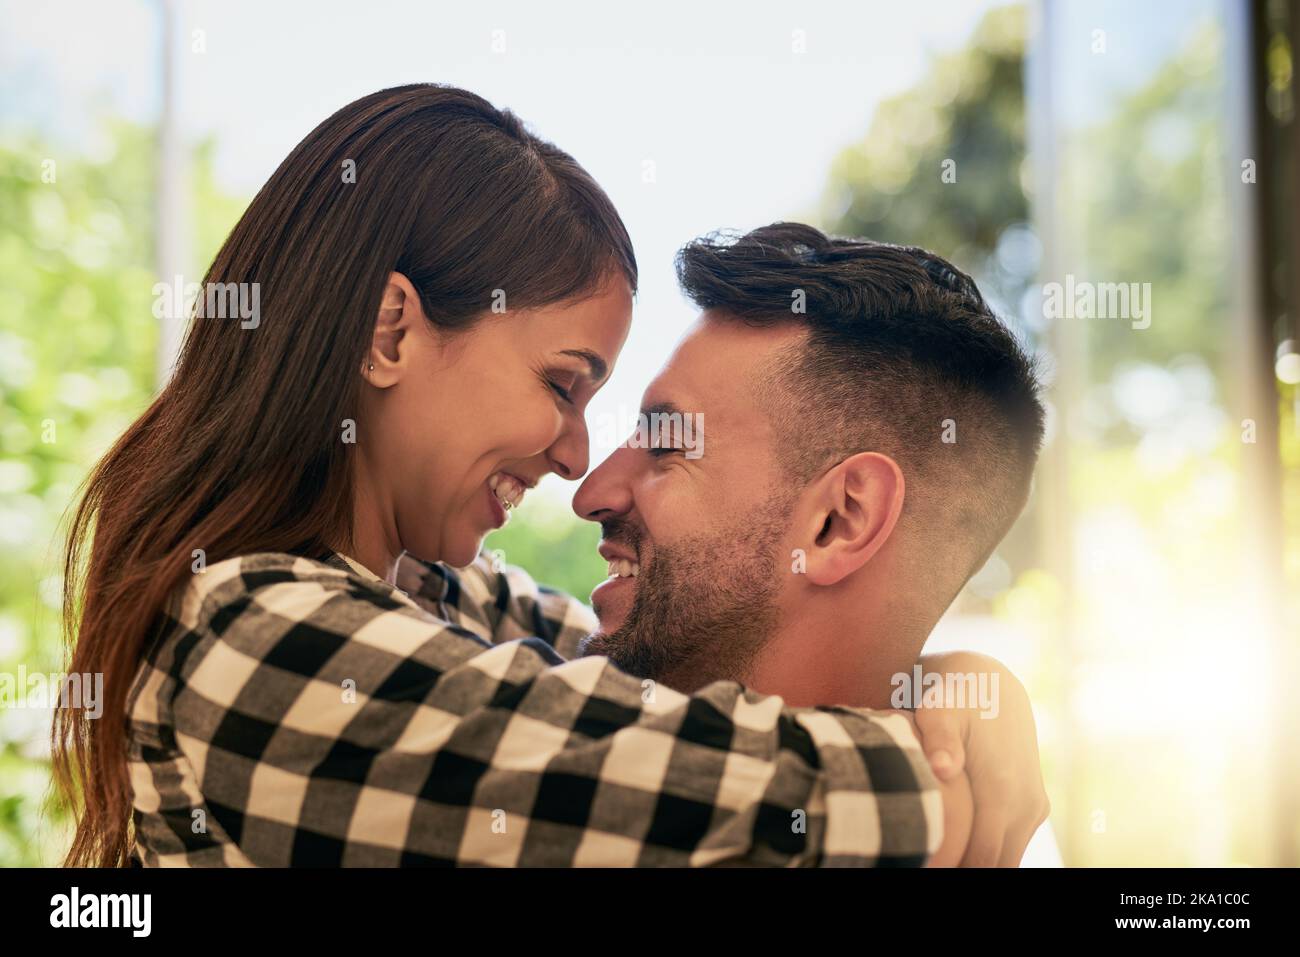 My one and only. an affectionate young couple bonding at home. Stock Photo